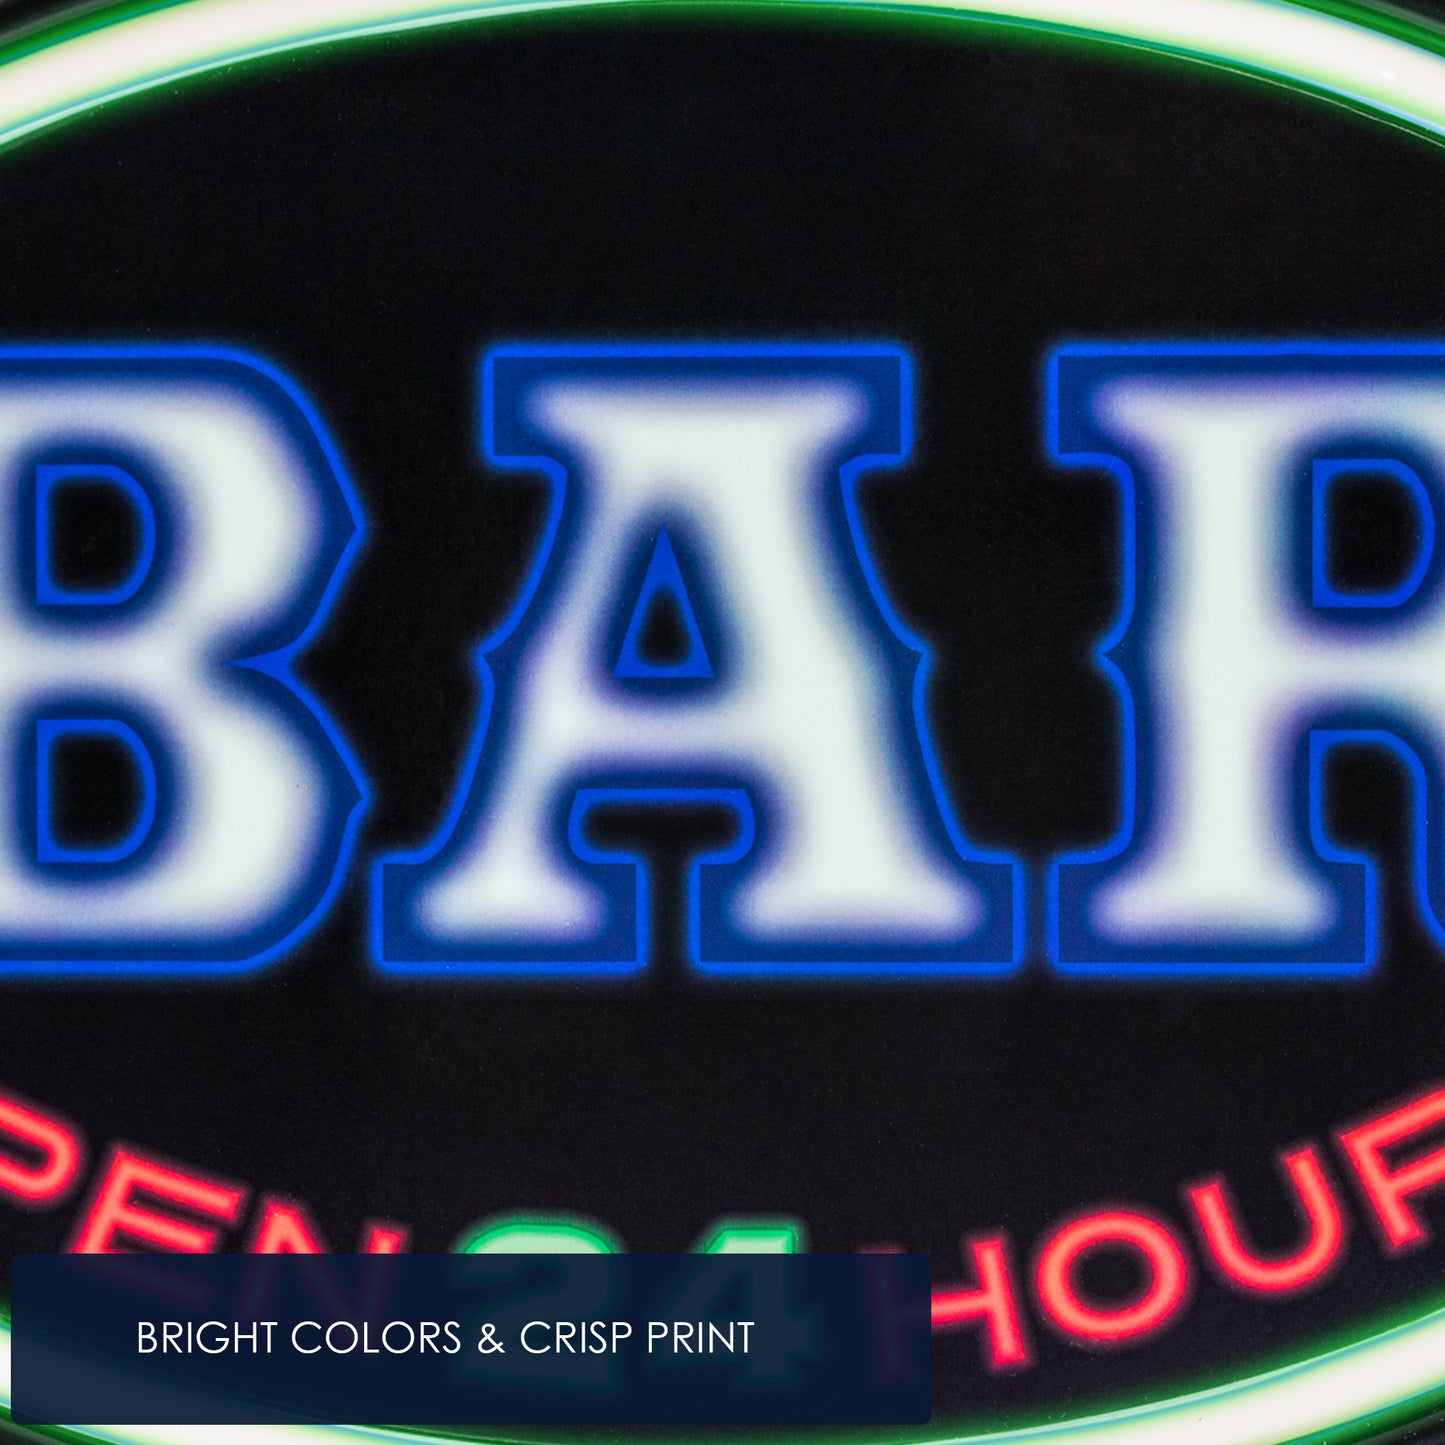 Bar Open 24 Hours LED Neon Rope Wall Sign